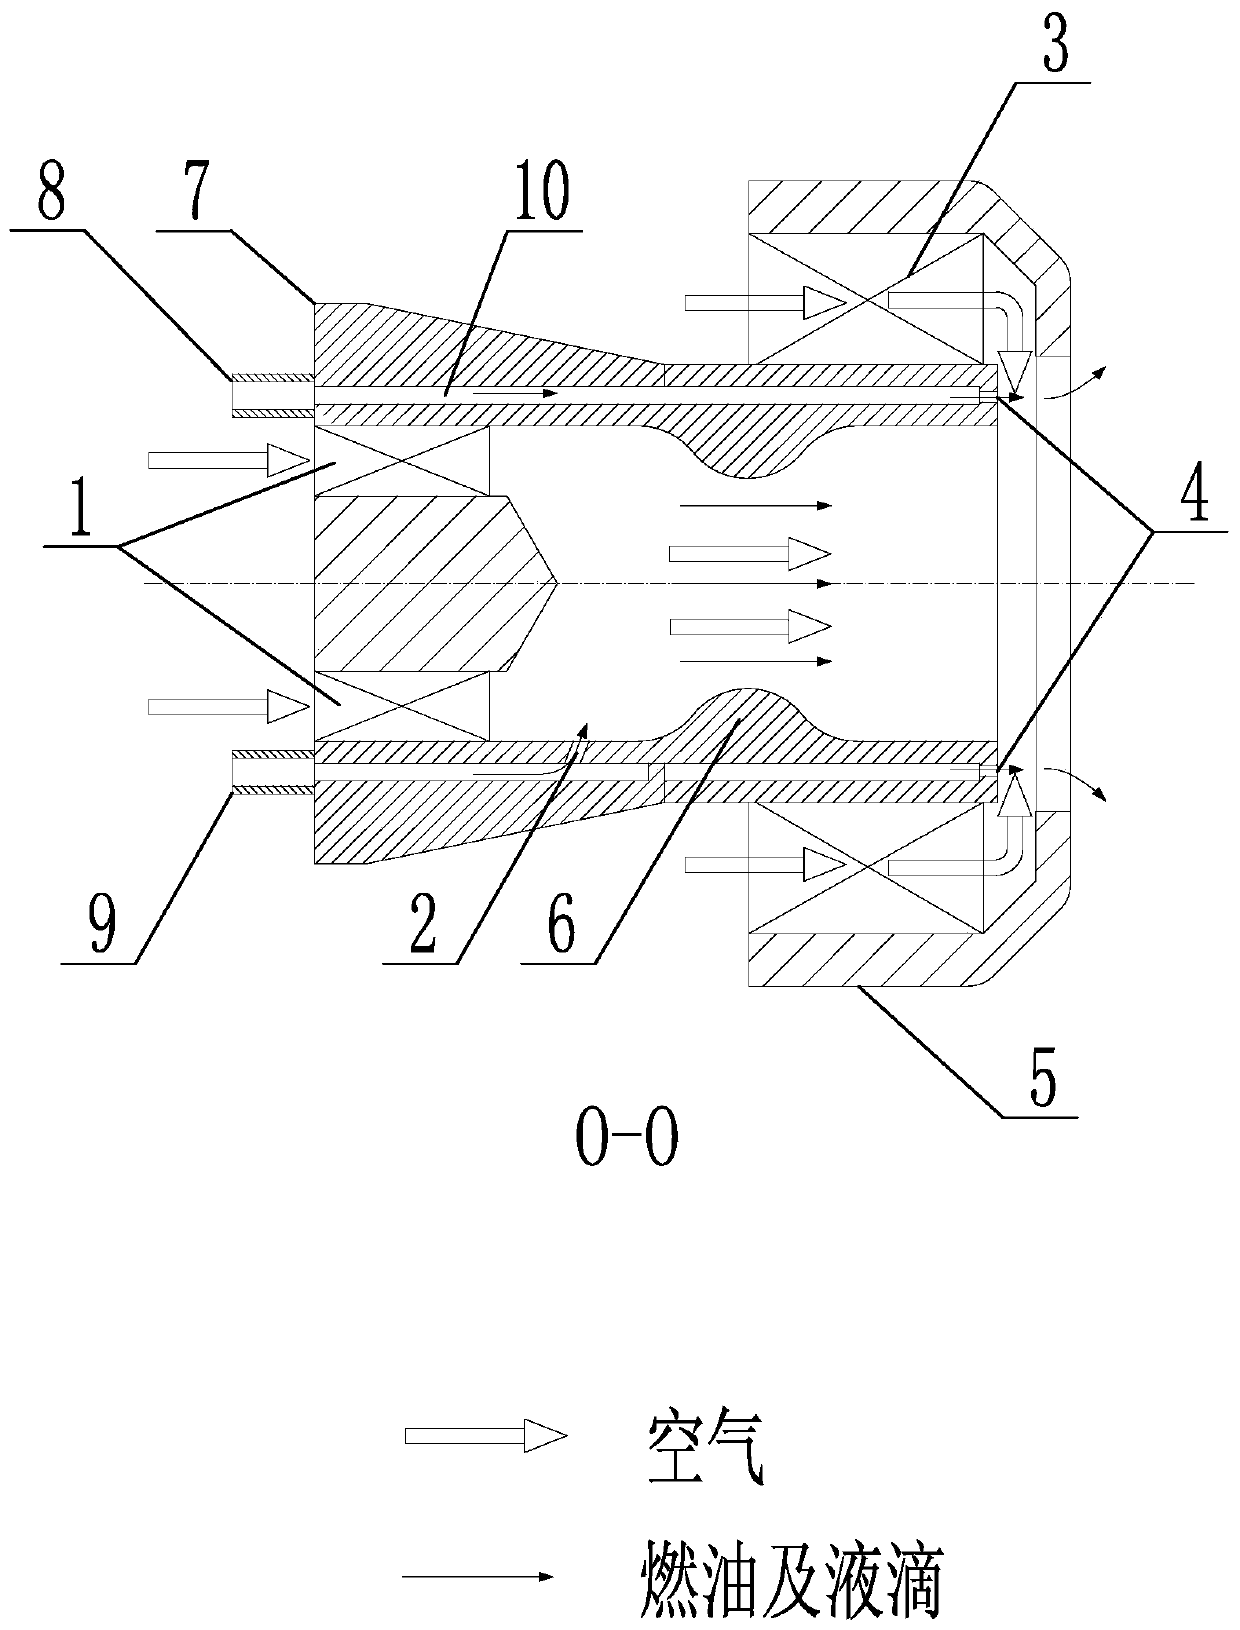 Air atomization nozzle of double-oil-path and double-rotational-flow structure